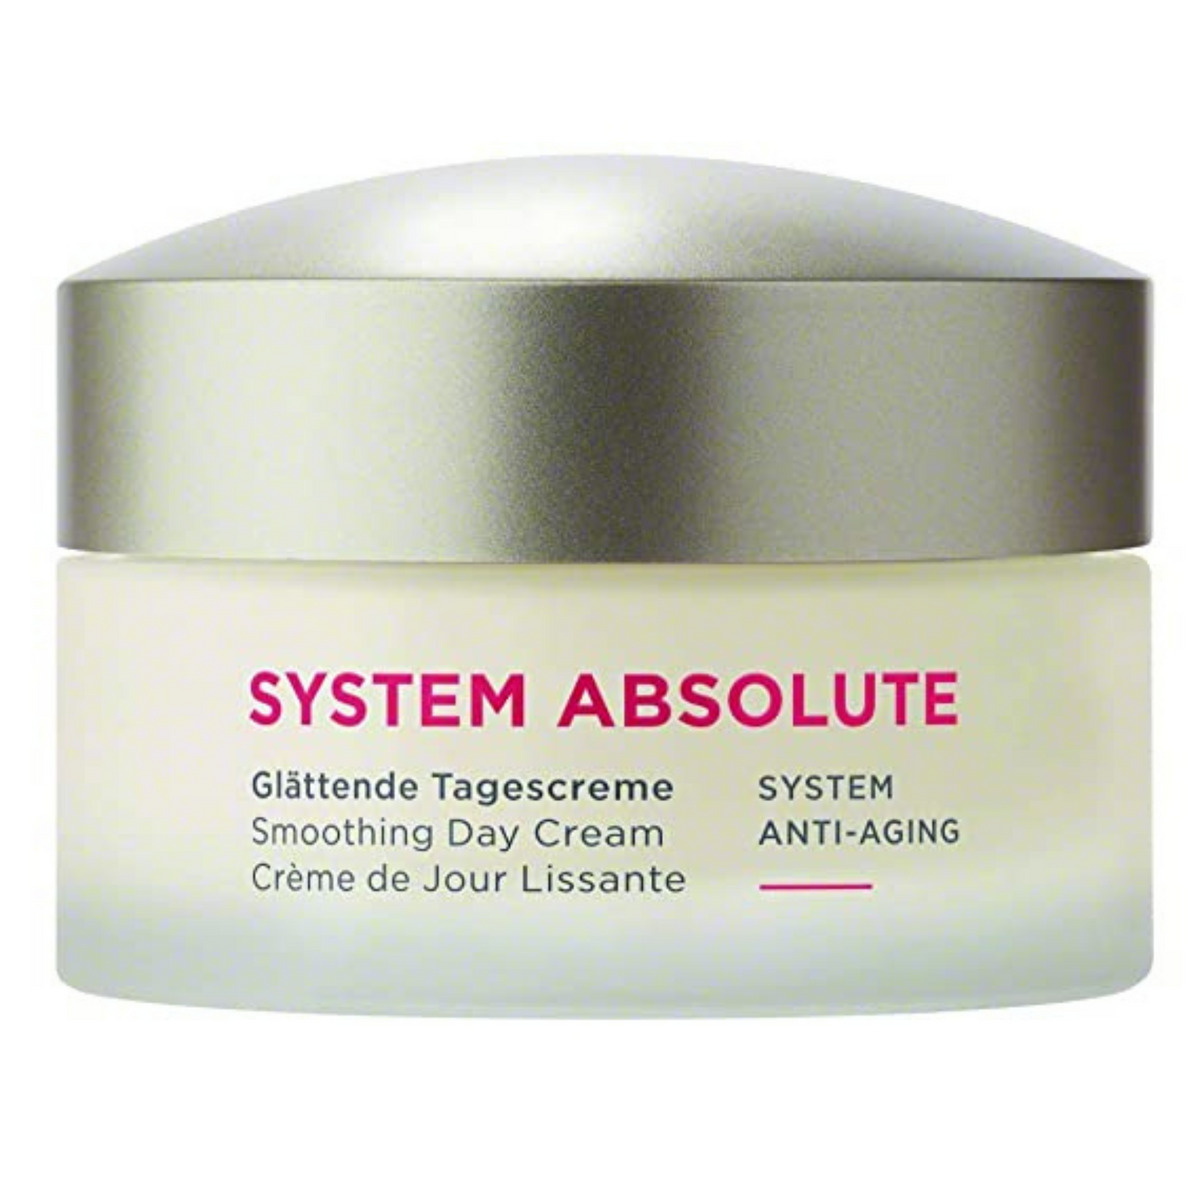 Primary Image of System Absolute Smoothing Day Cream